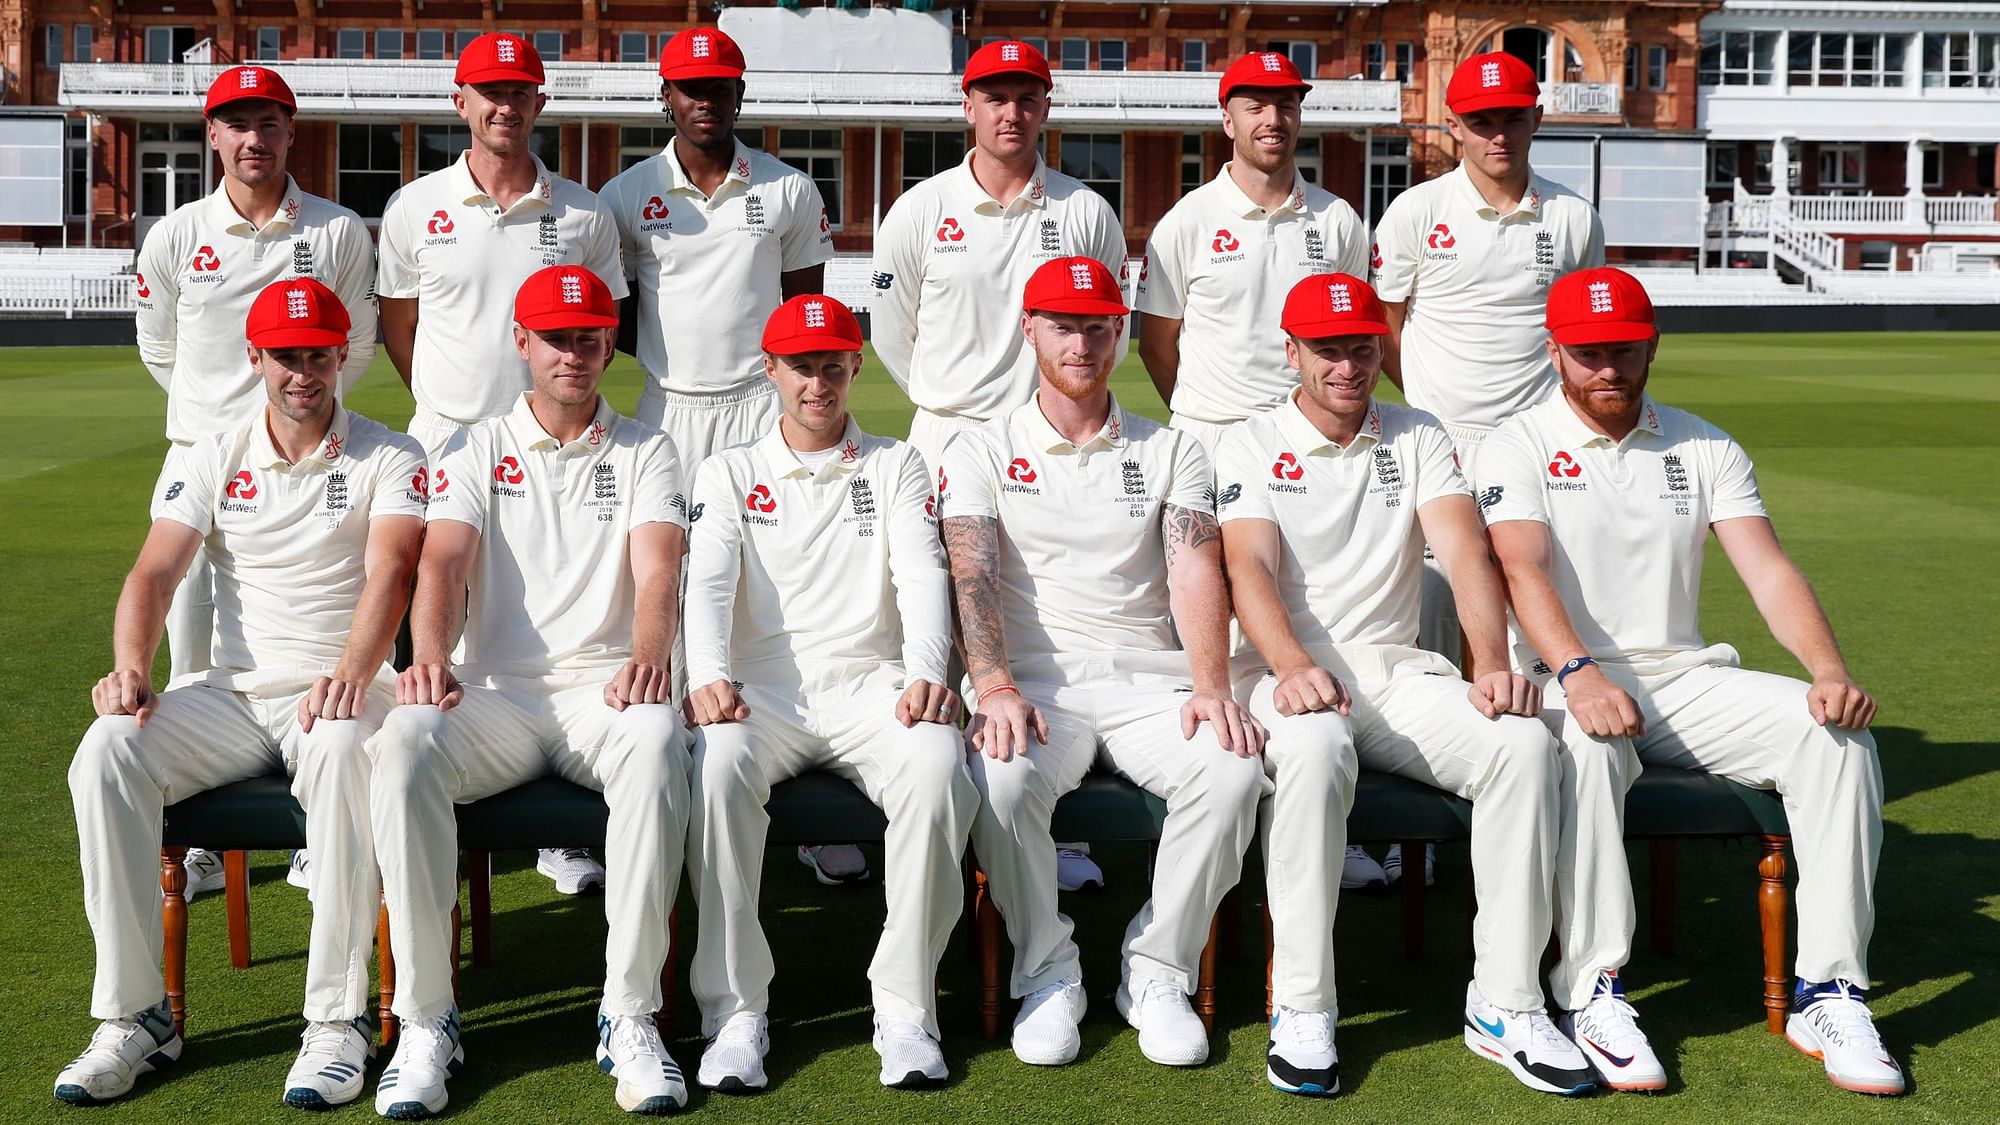 The England and Wales Cricket Board (ECB) has suspended all professional cricket till 28 May.